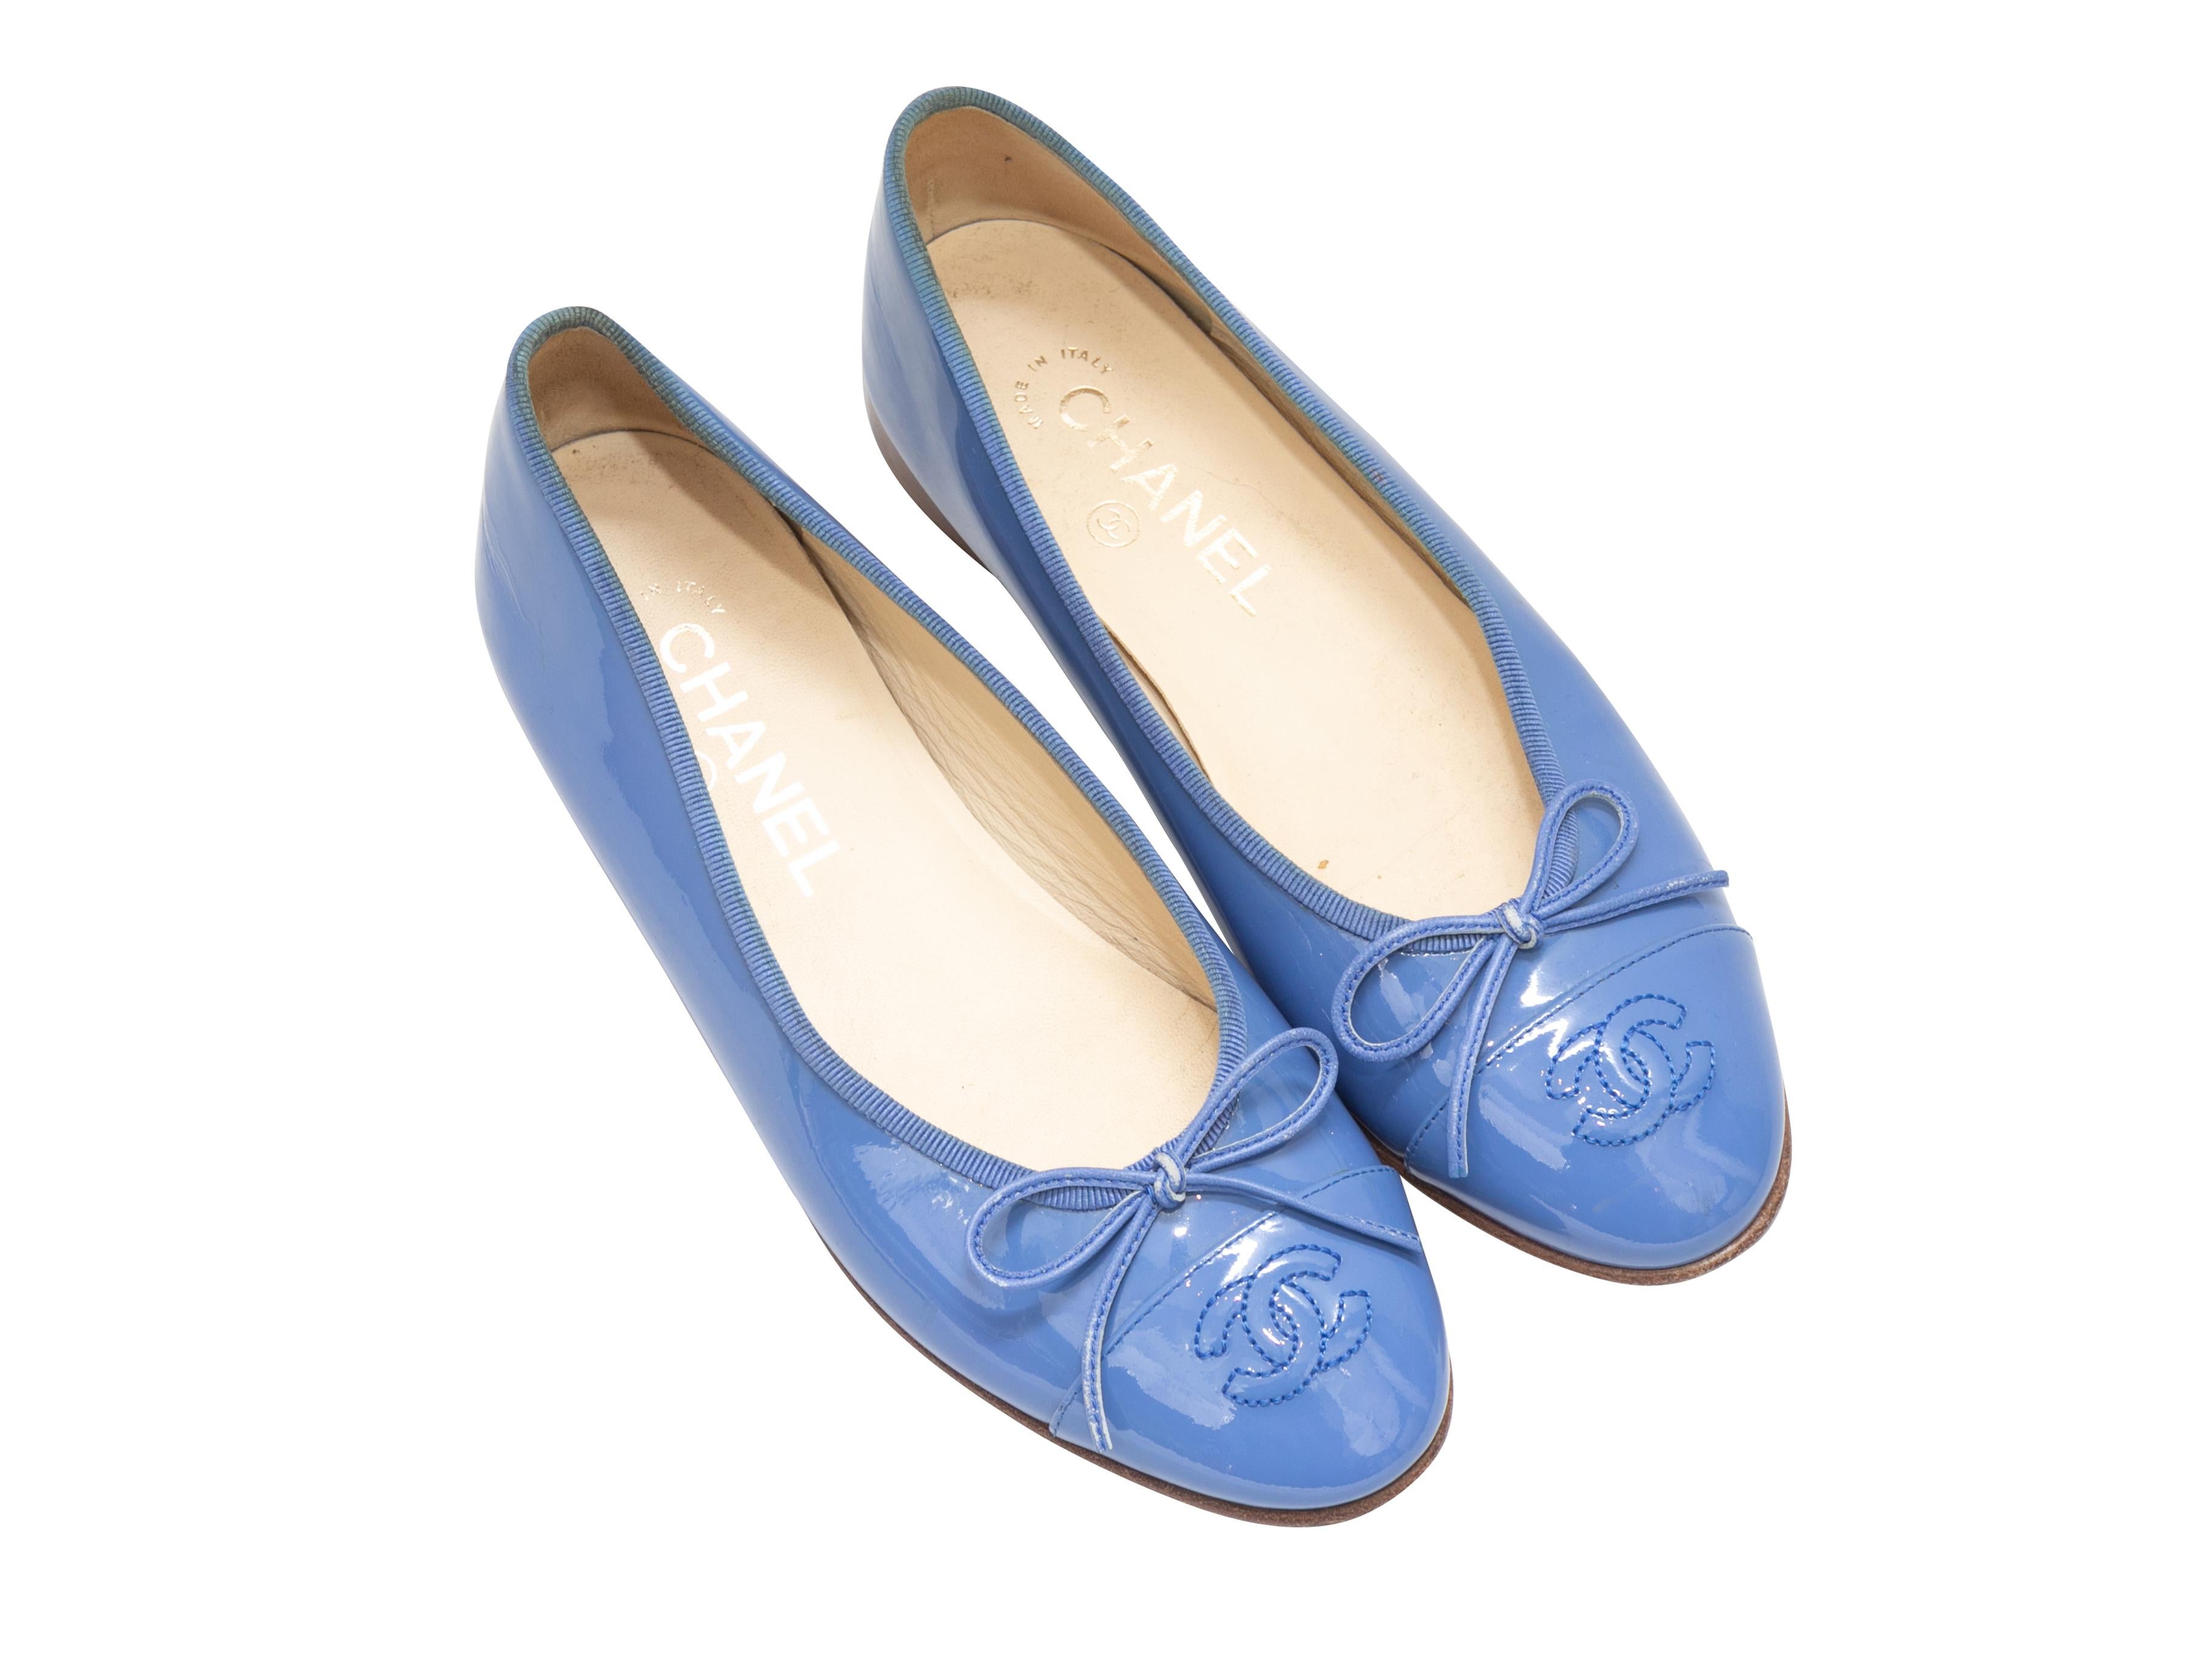 Periwinkle patent leather cap-toe ballet flats by Chanel. CC logo embroidery and bow accents at tops. 3.5